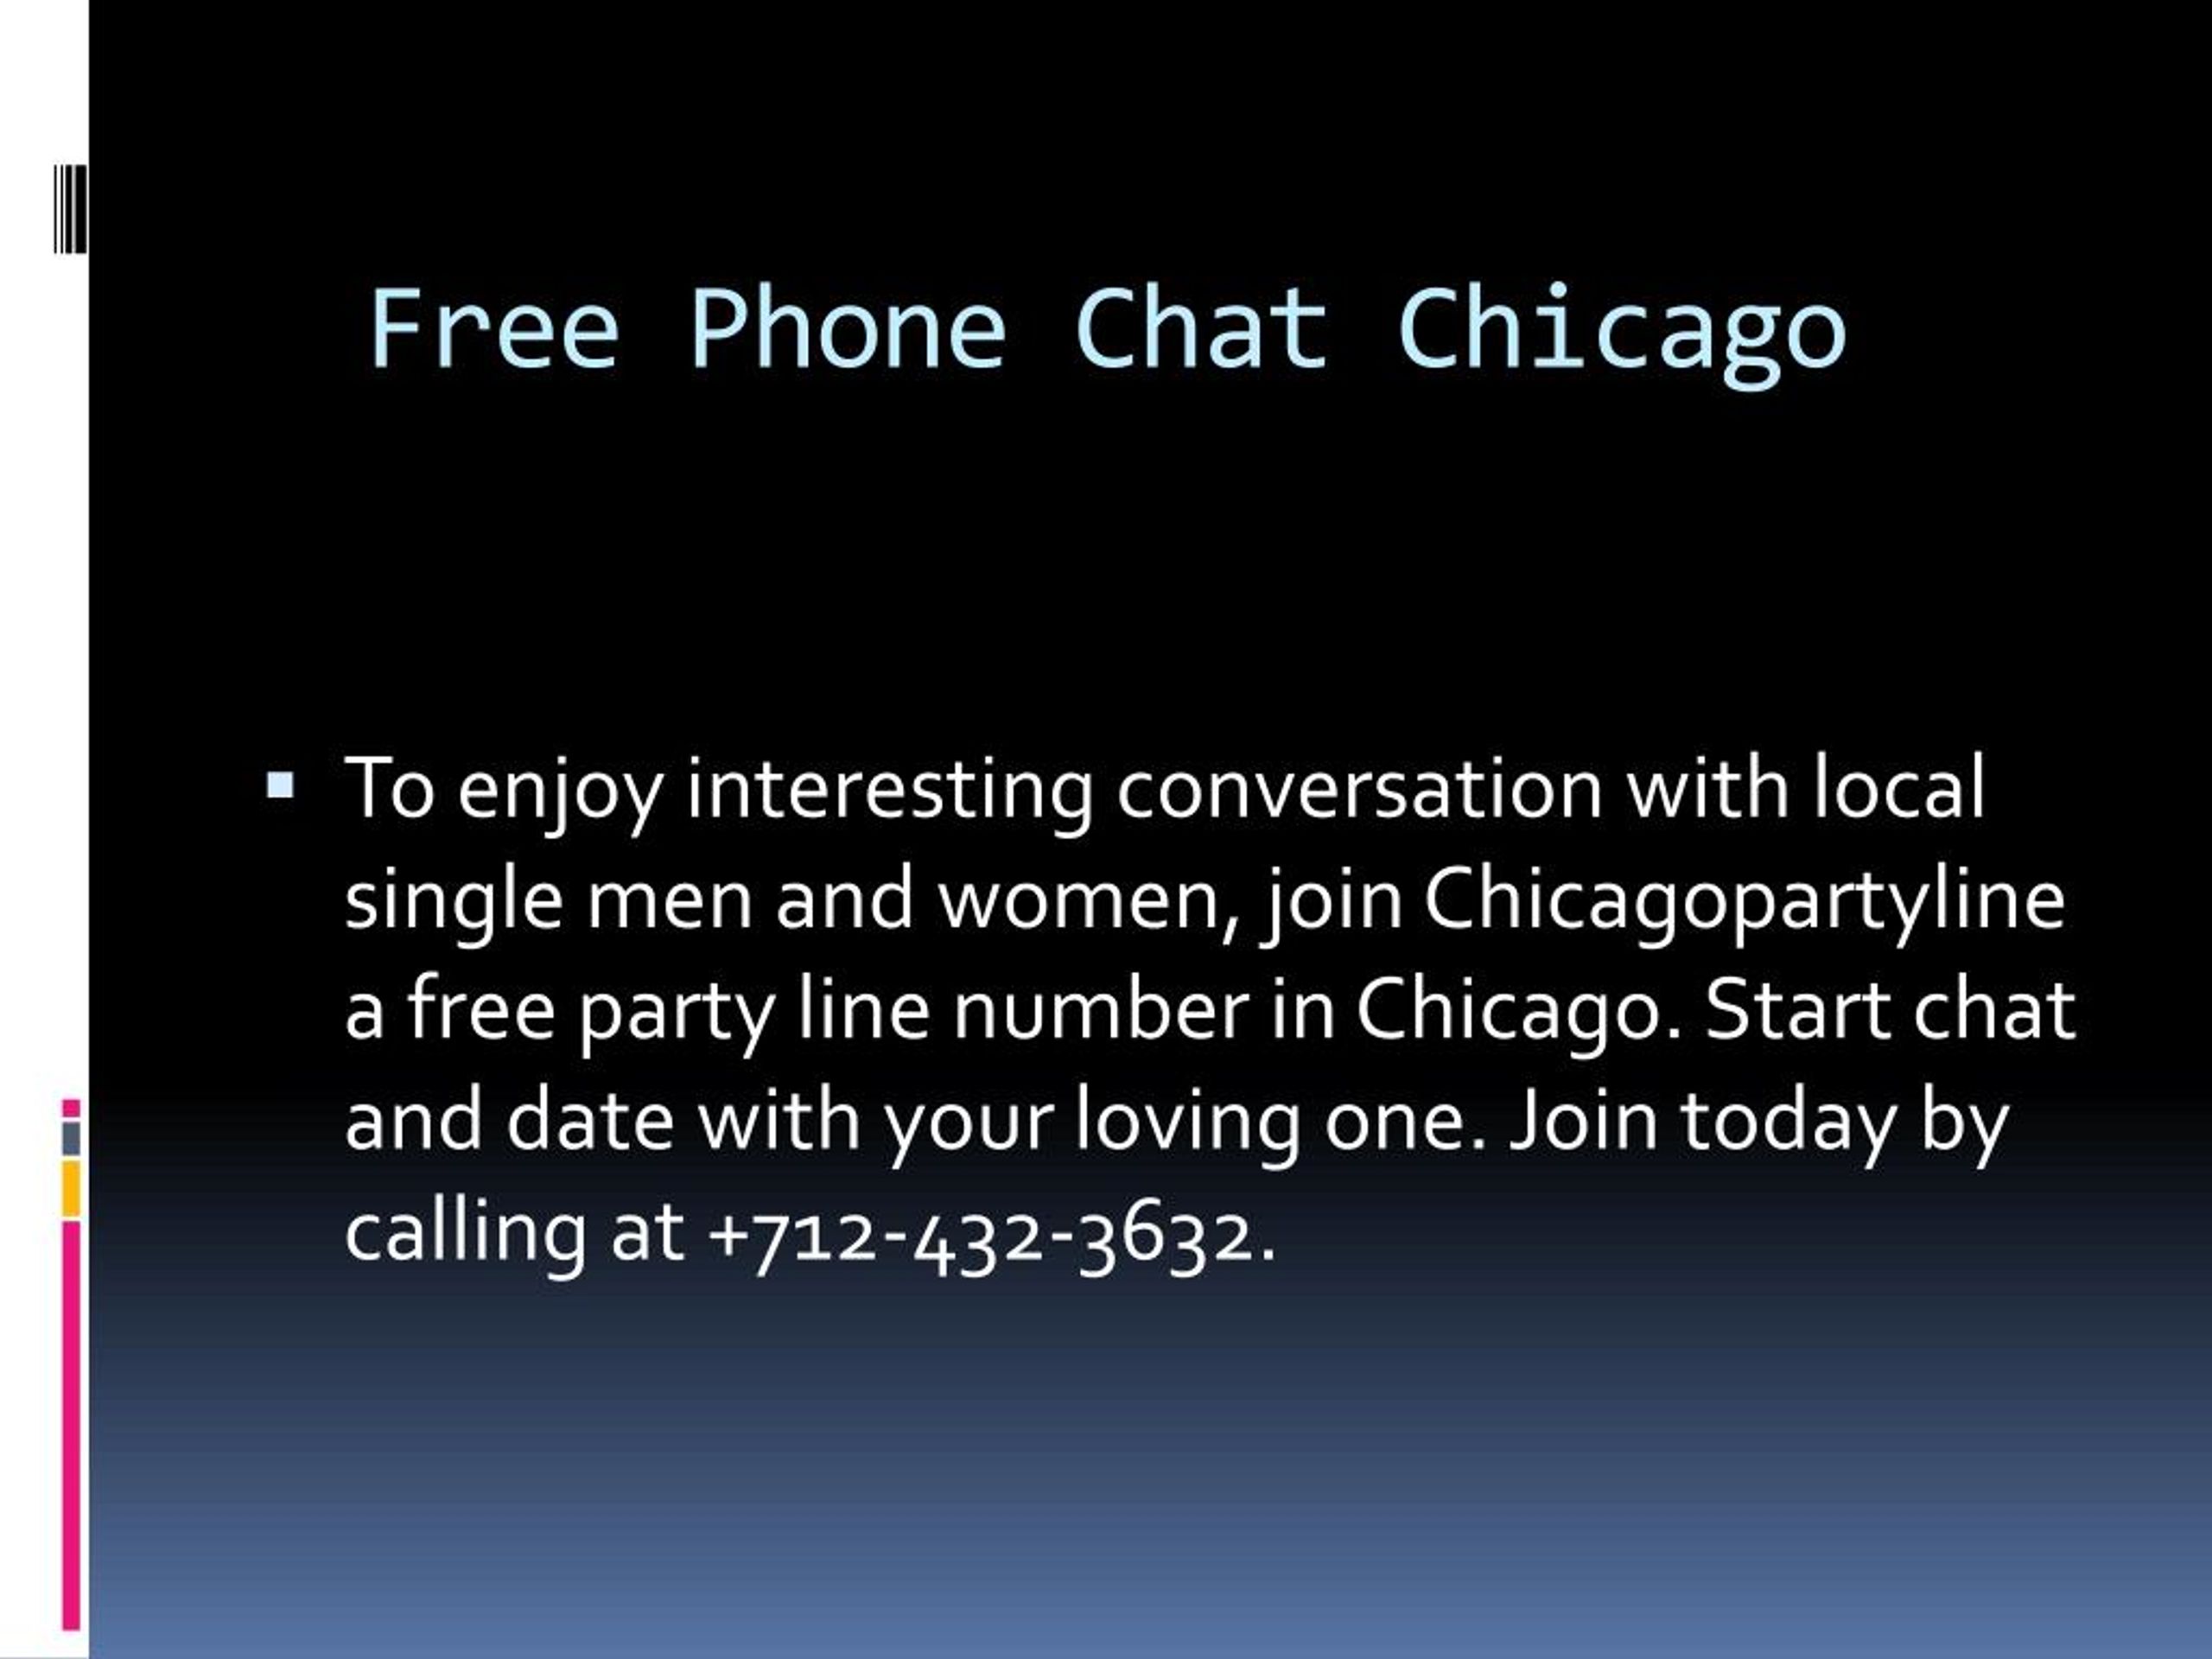 Free phone date chat